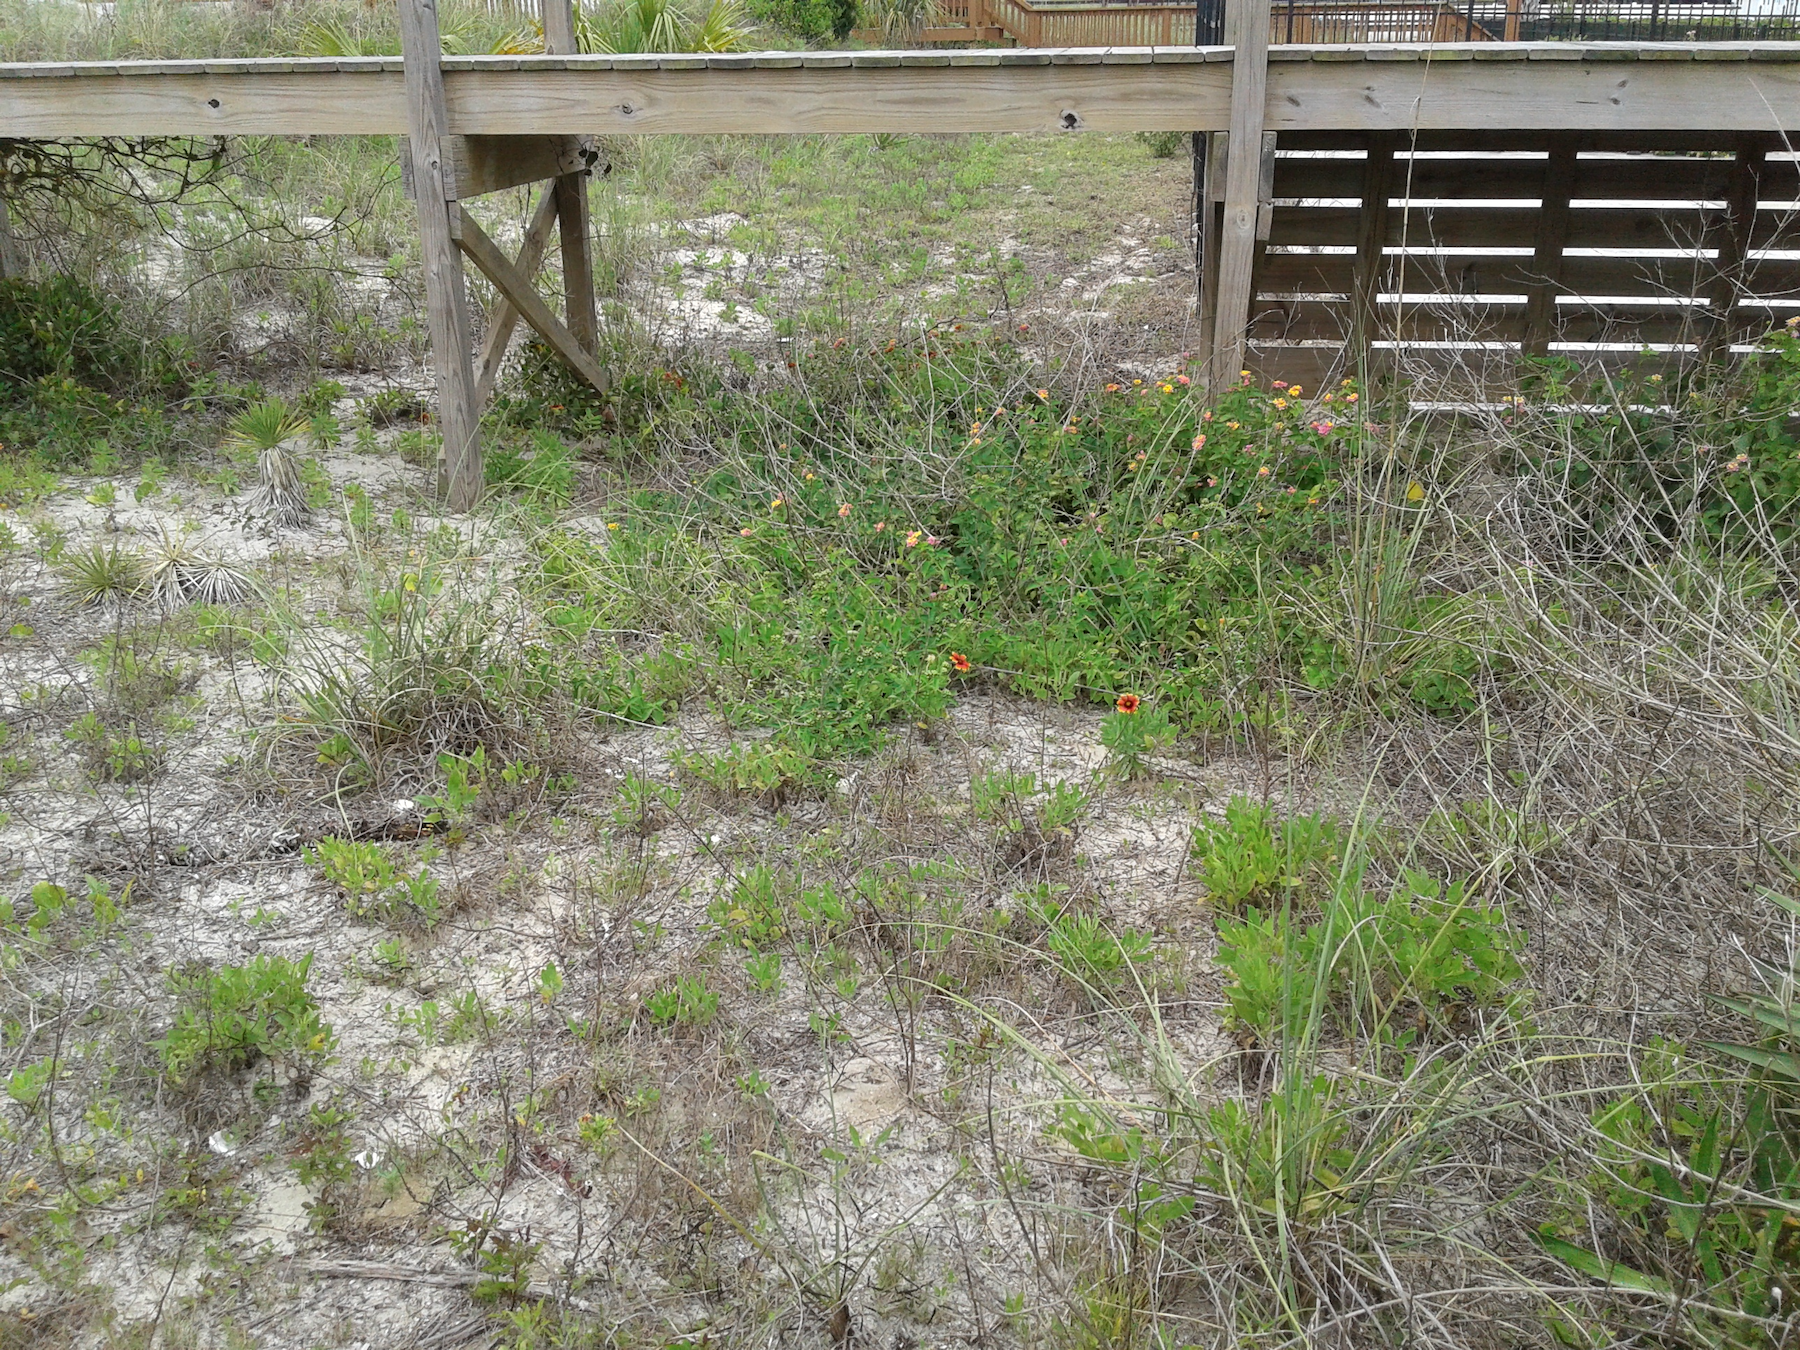 Low growing plants in sandy soil with yellow and orange blooms.